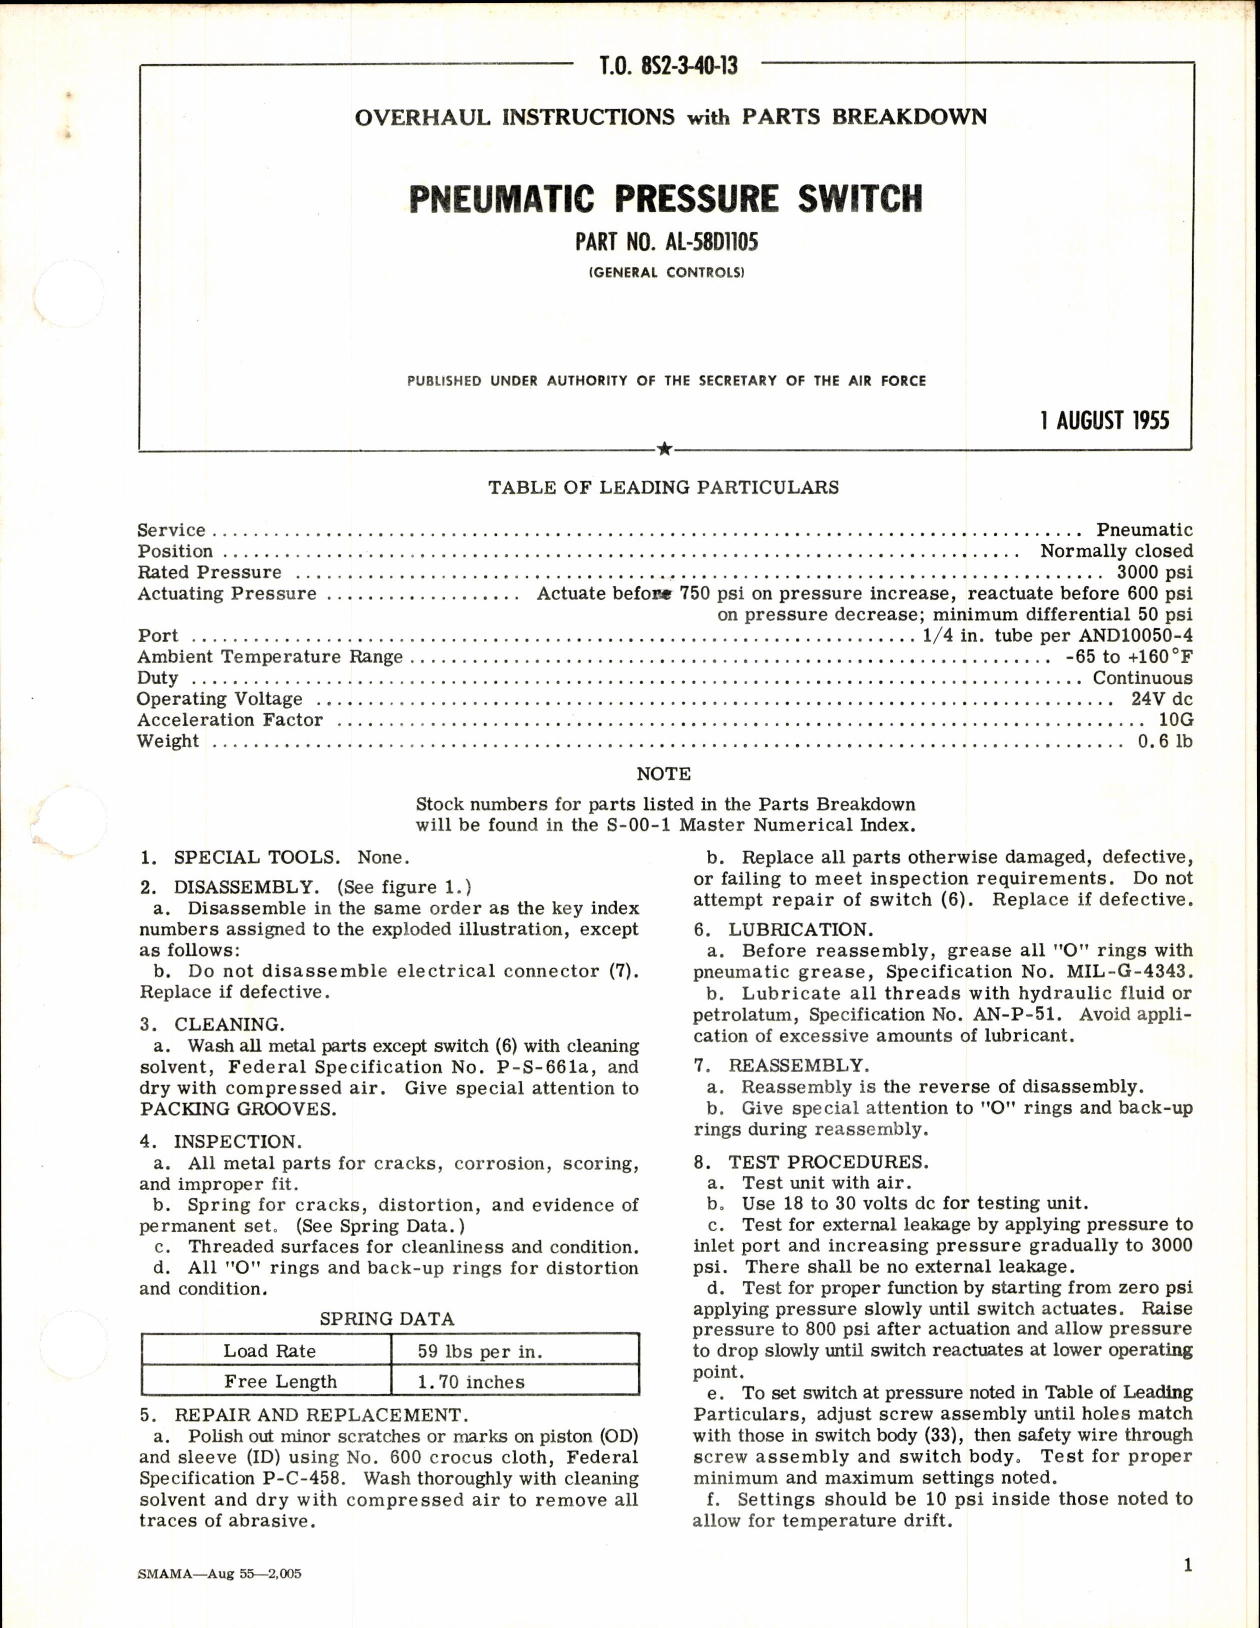 Sample page 1 from AirCorps Library document: Pneumatic Pressure Switch Part No AL-58D1105